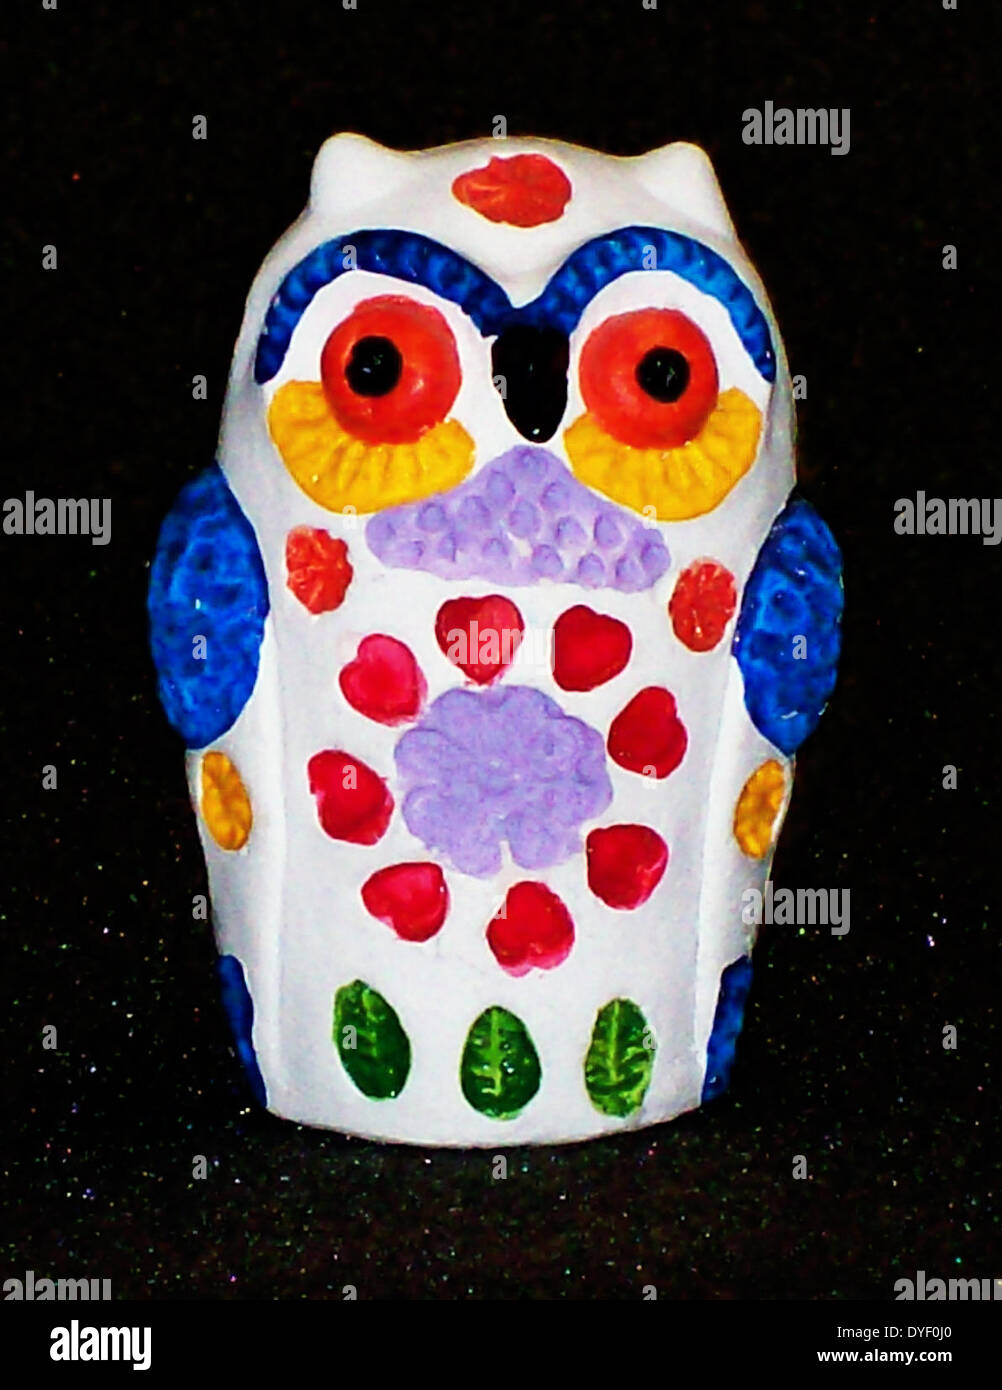 Lucky Charm in the shape of an owl, decorated with hearts and flowers, Minorca, Balearics, Spain, late 20th century. Stock Photo